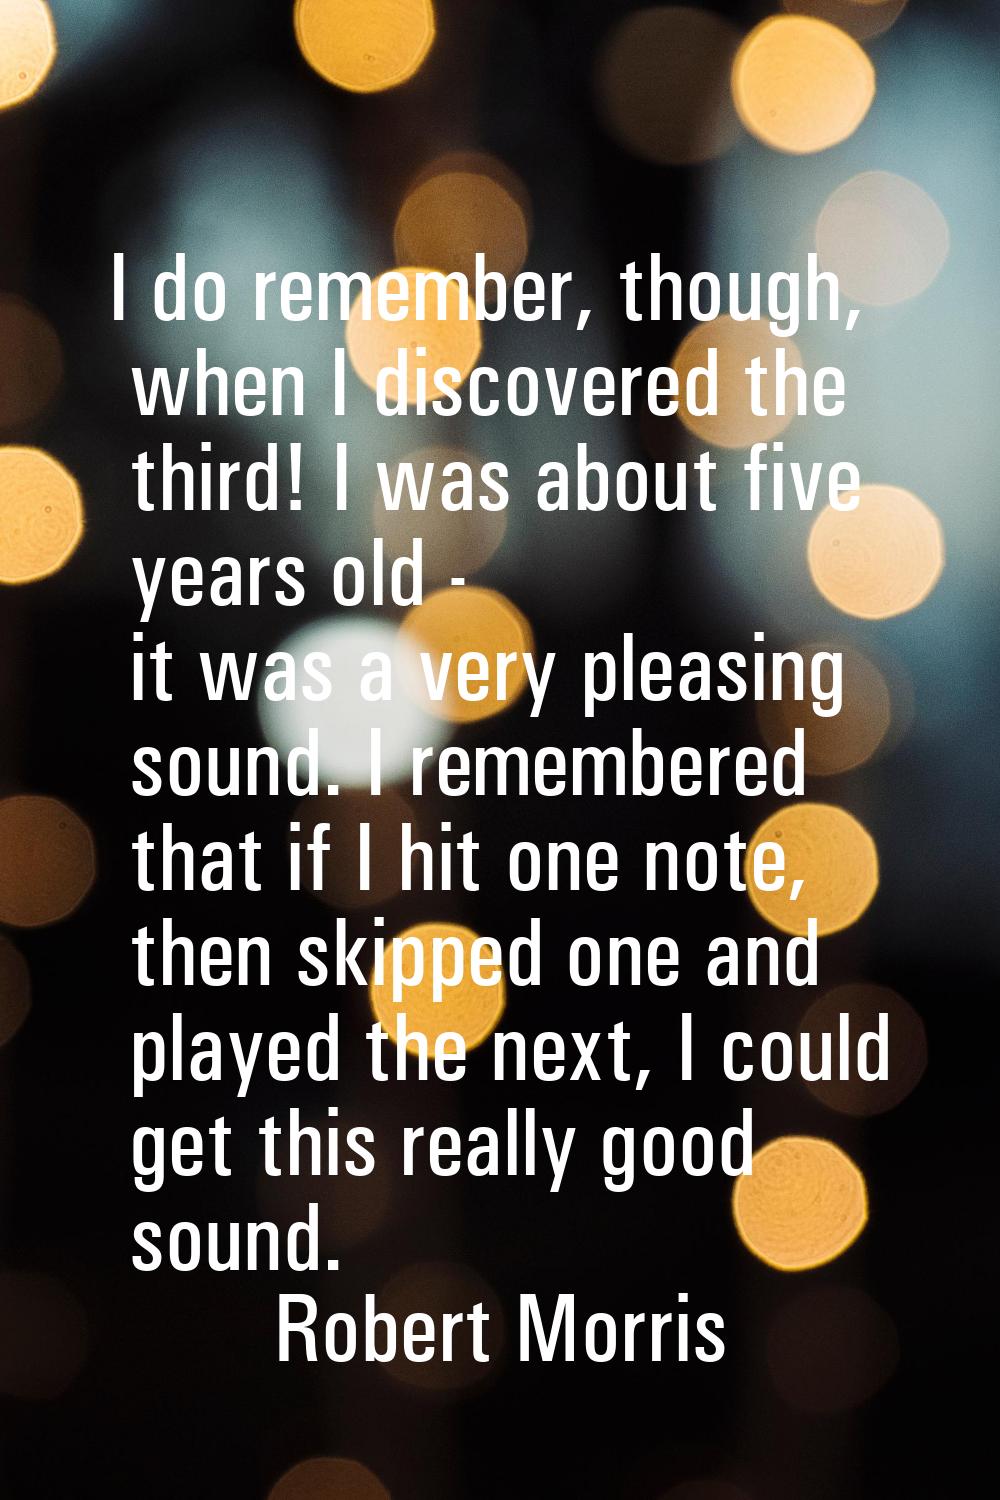 I do remember, though, when I discovered the third! I was about five years old - it was a very plea